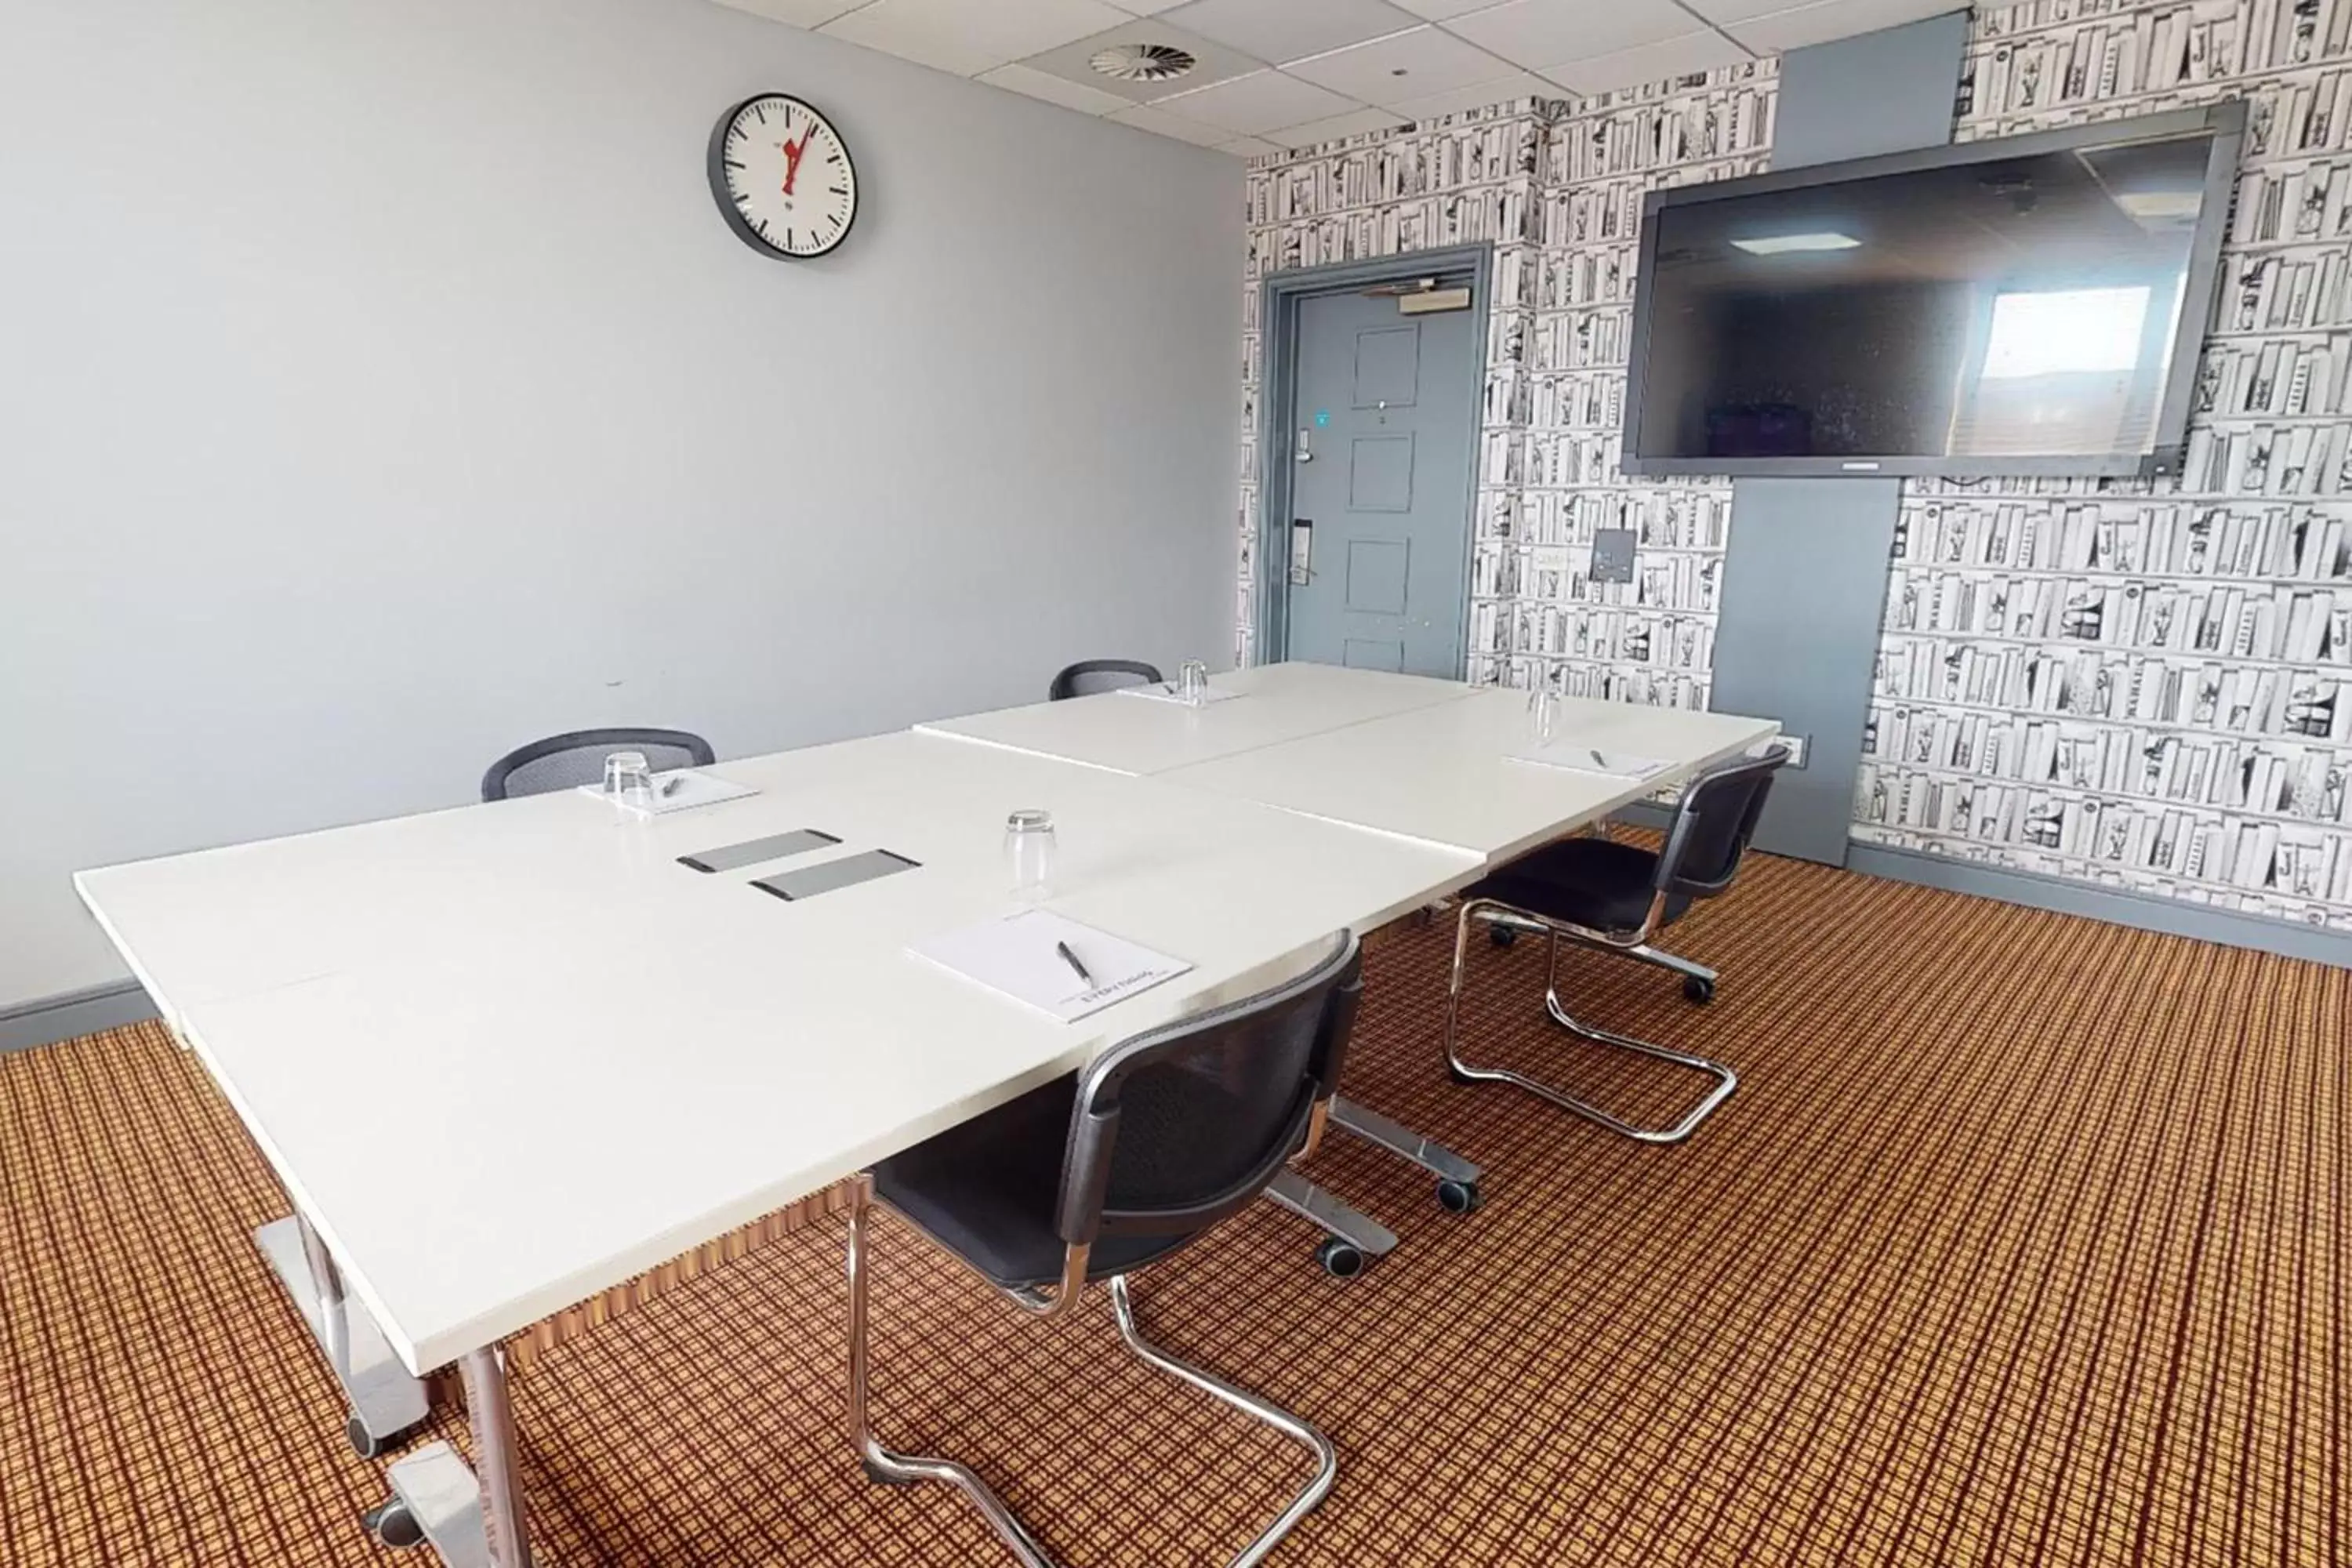 Meeting/conference room in Village Hotel Swansea